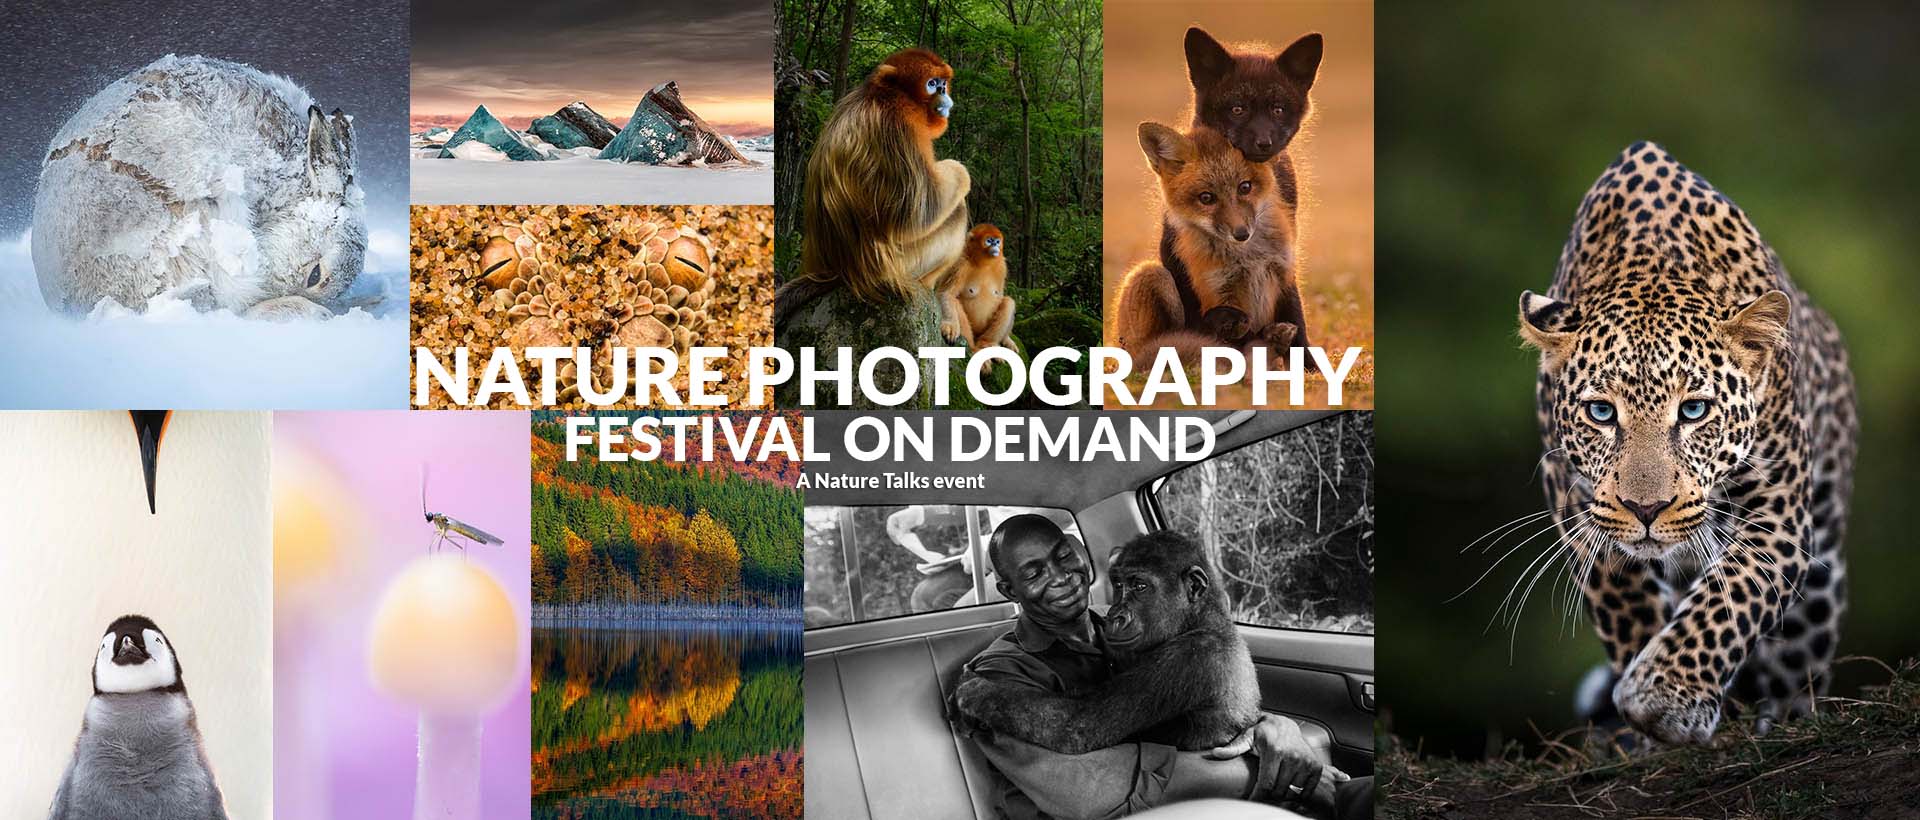 opbevaring Plateau Site line International photo competition - Nature Photographer of the Year 2021